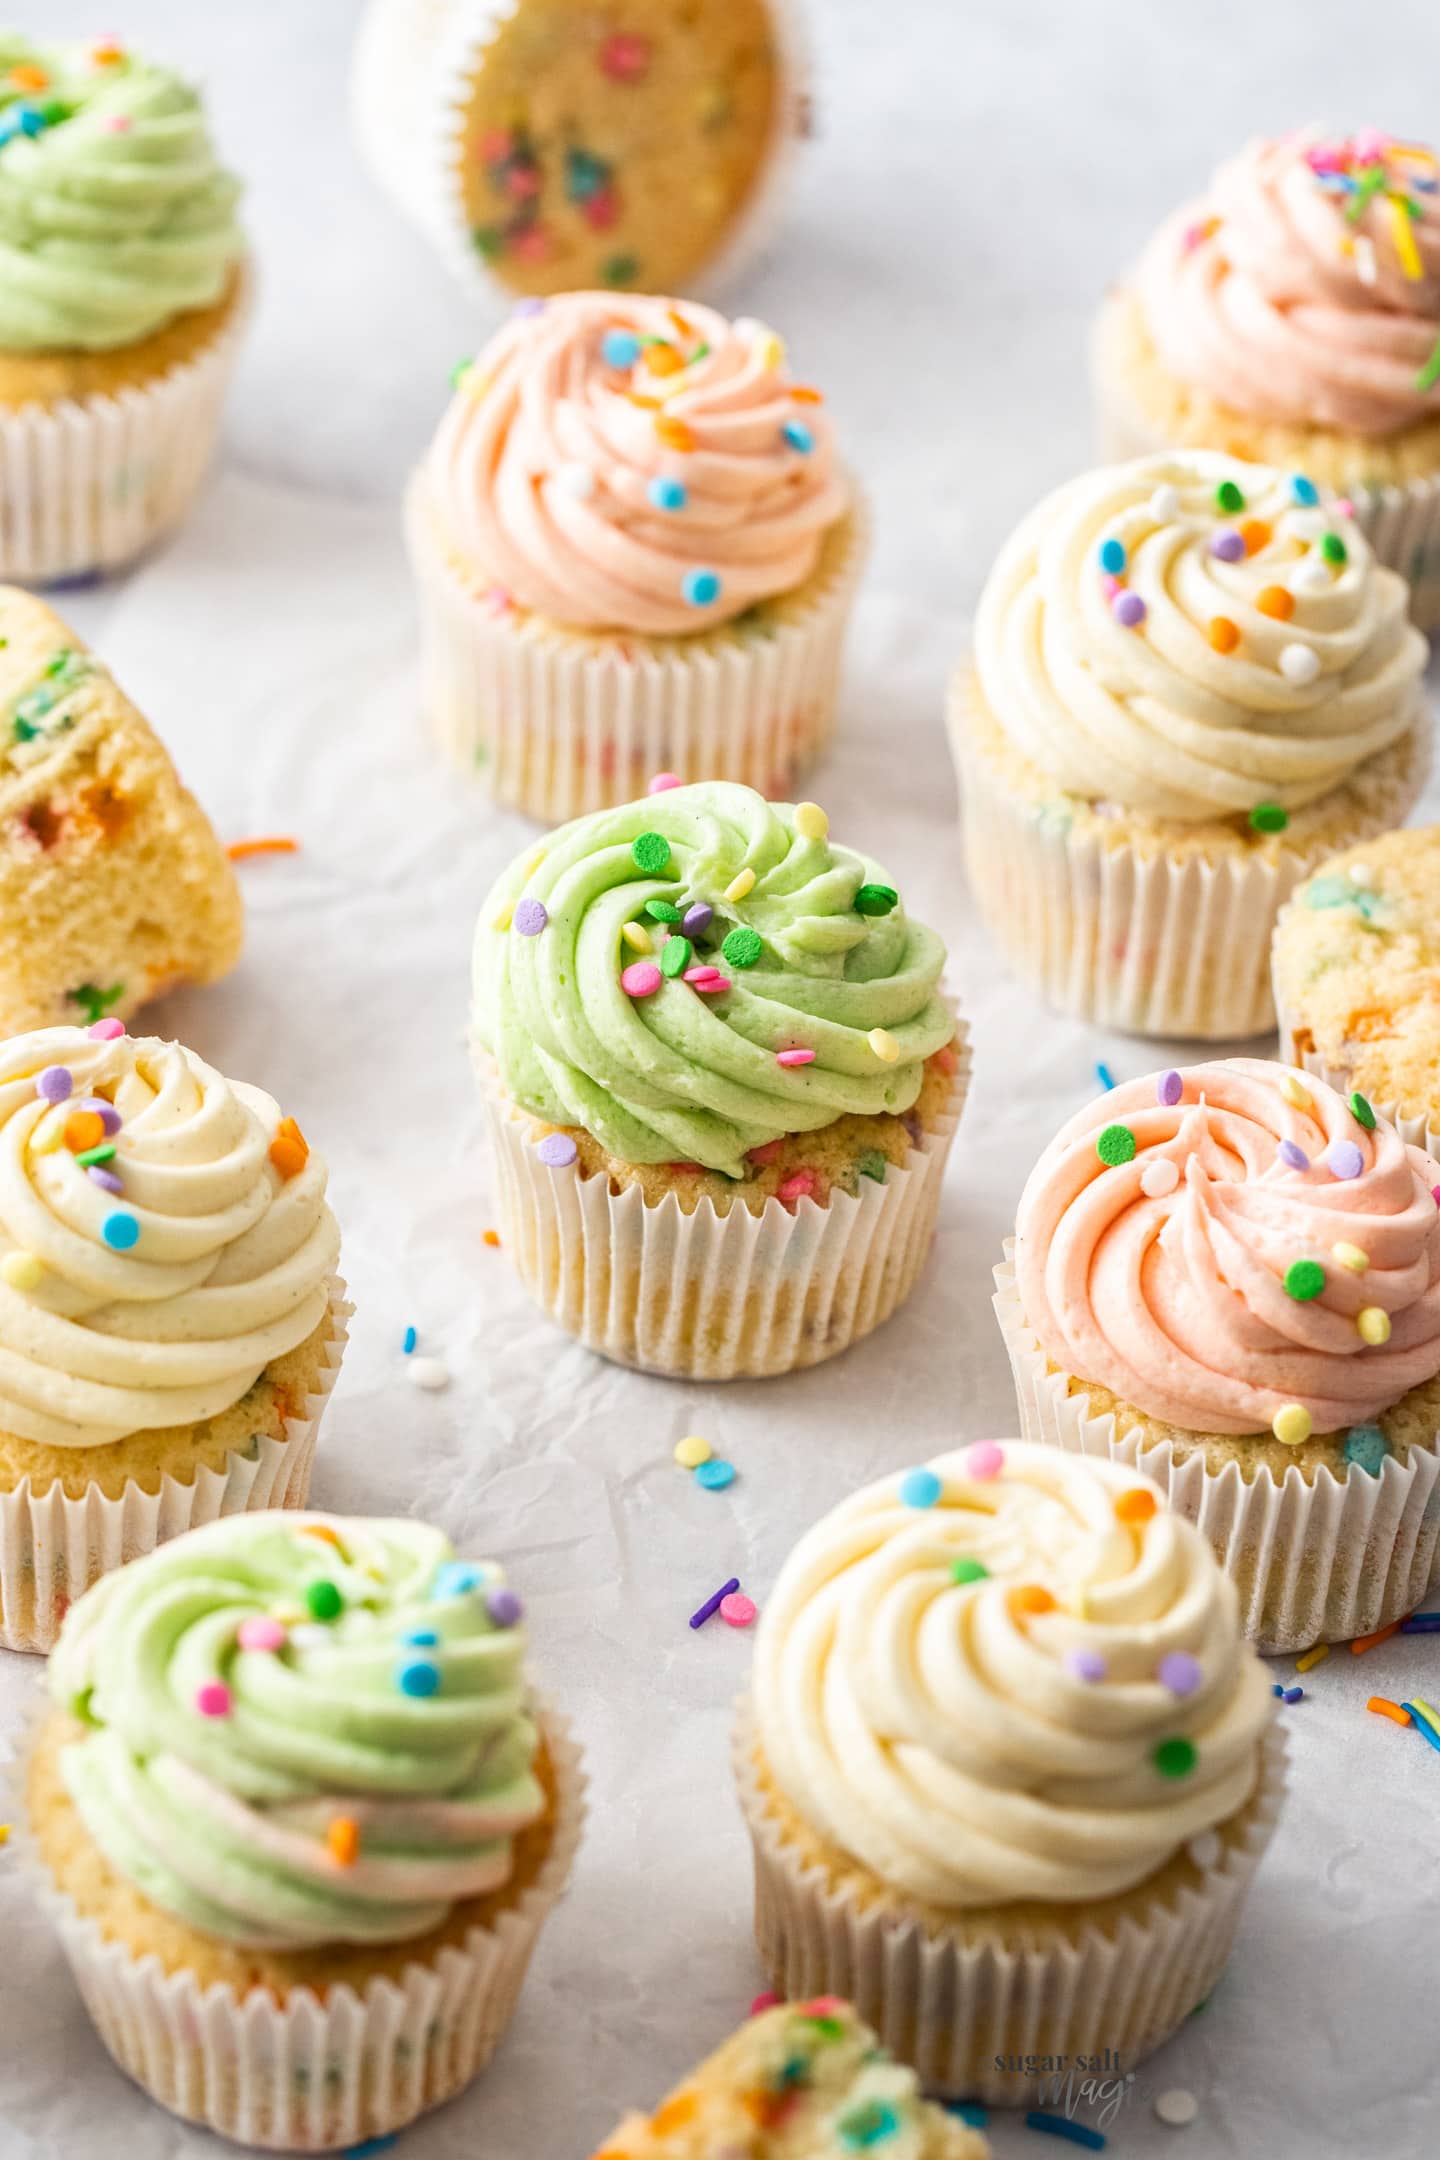 A batch of 12 confetti cupcakes with different coloured frosting.